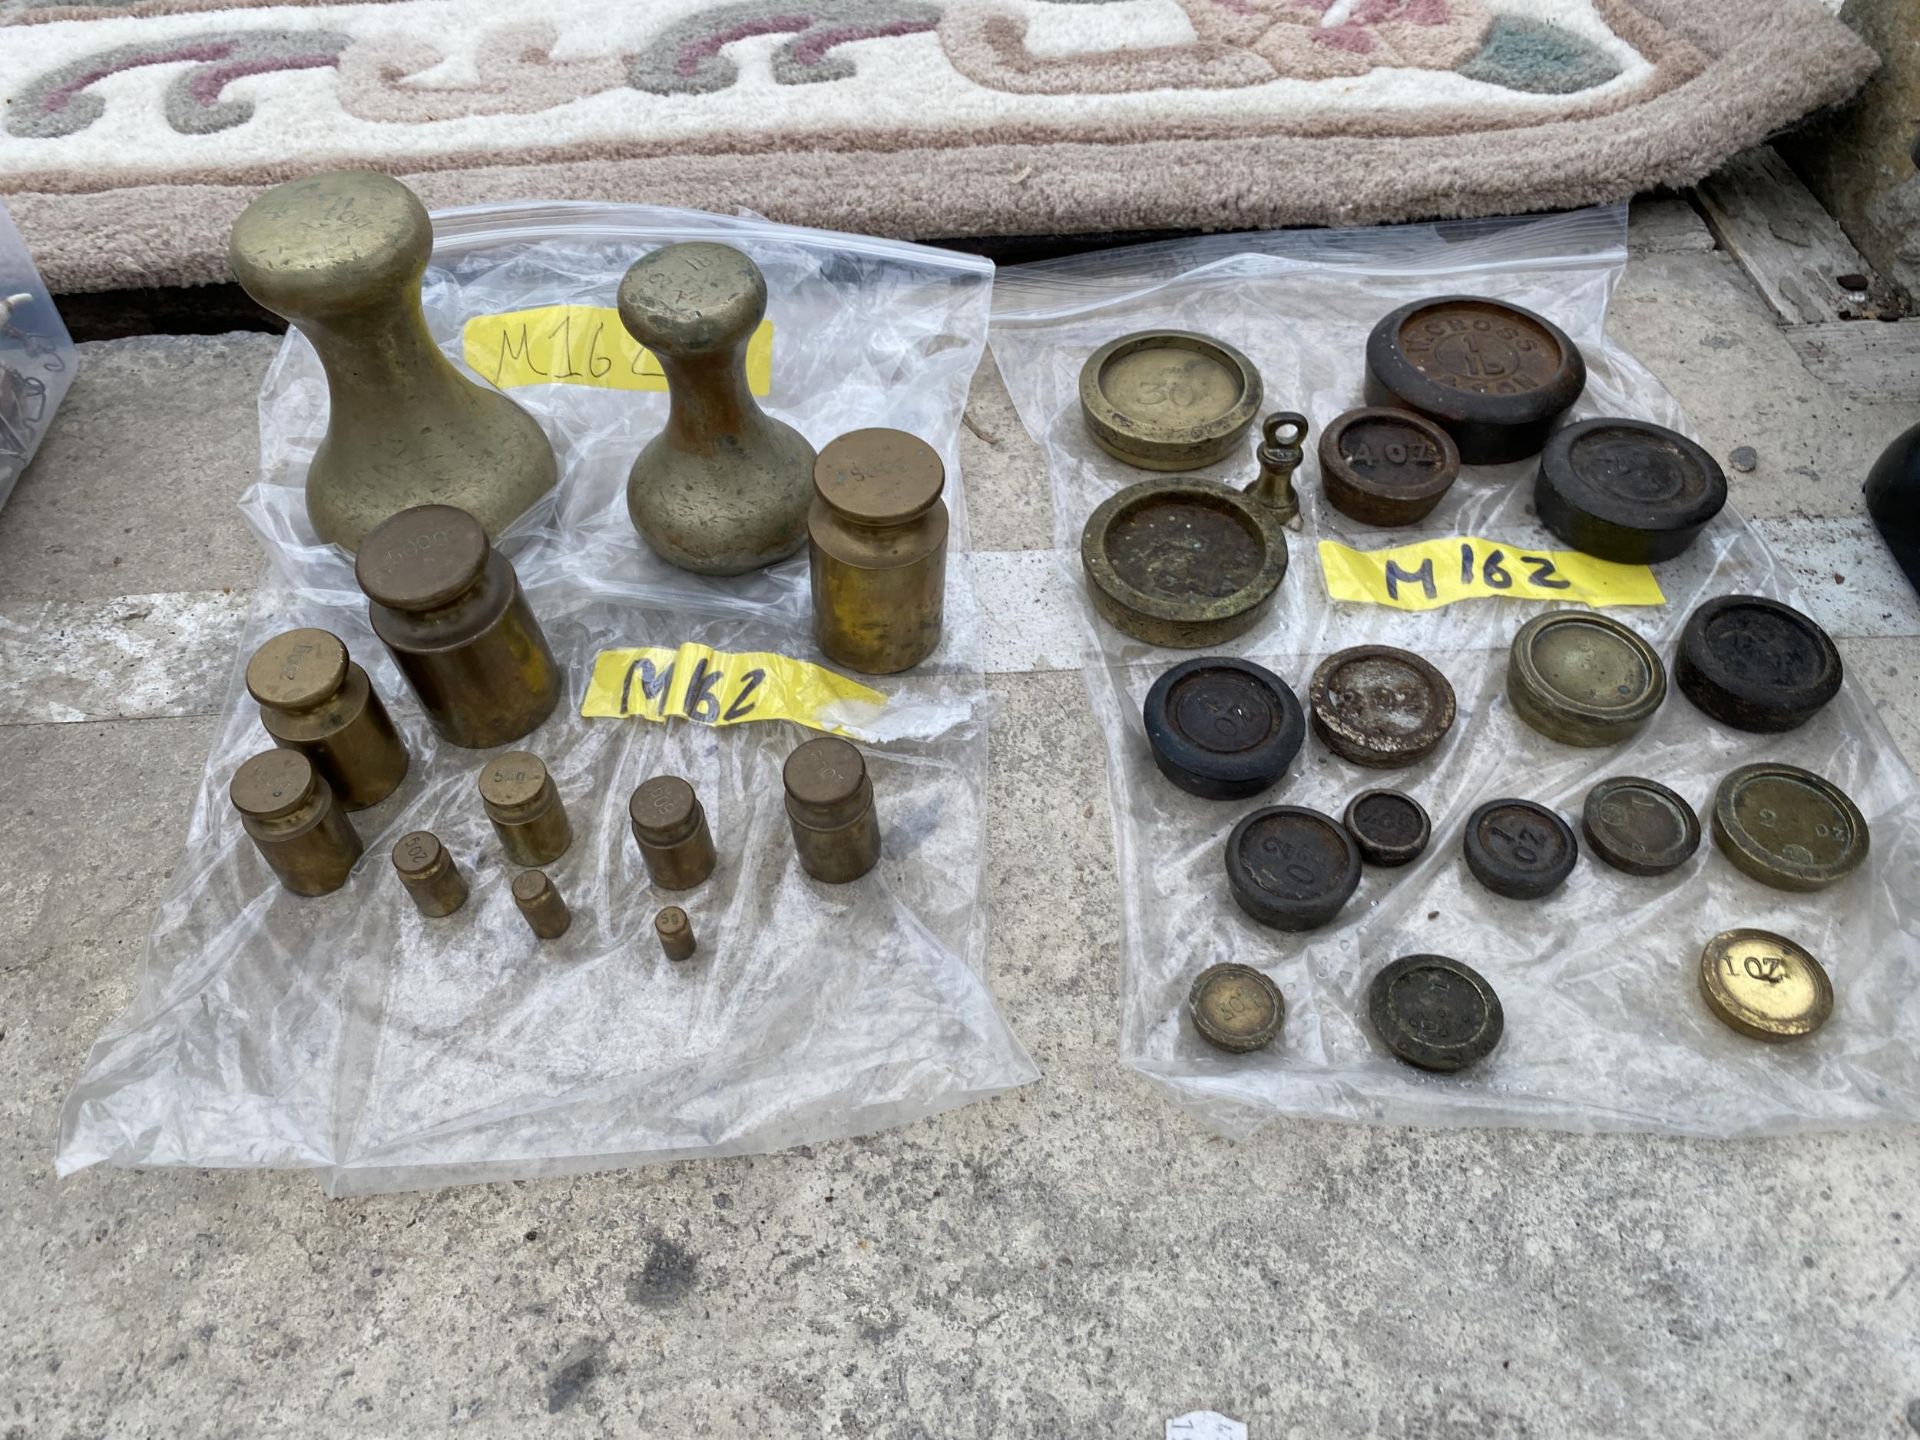 A SET OF VINTAGE 'THE QUEEN' BALANCE SCALES AND A LARGE ASSORTMENT OF VINTAGE WEIGHTS - Image 3 of 3